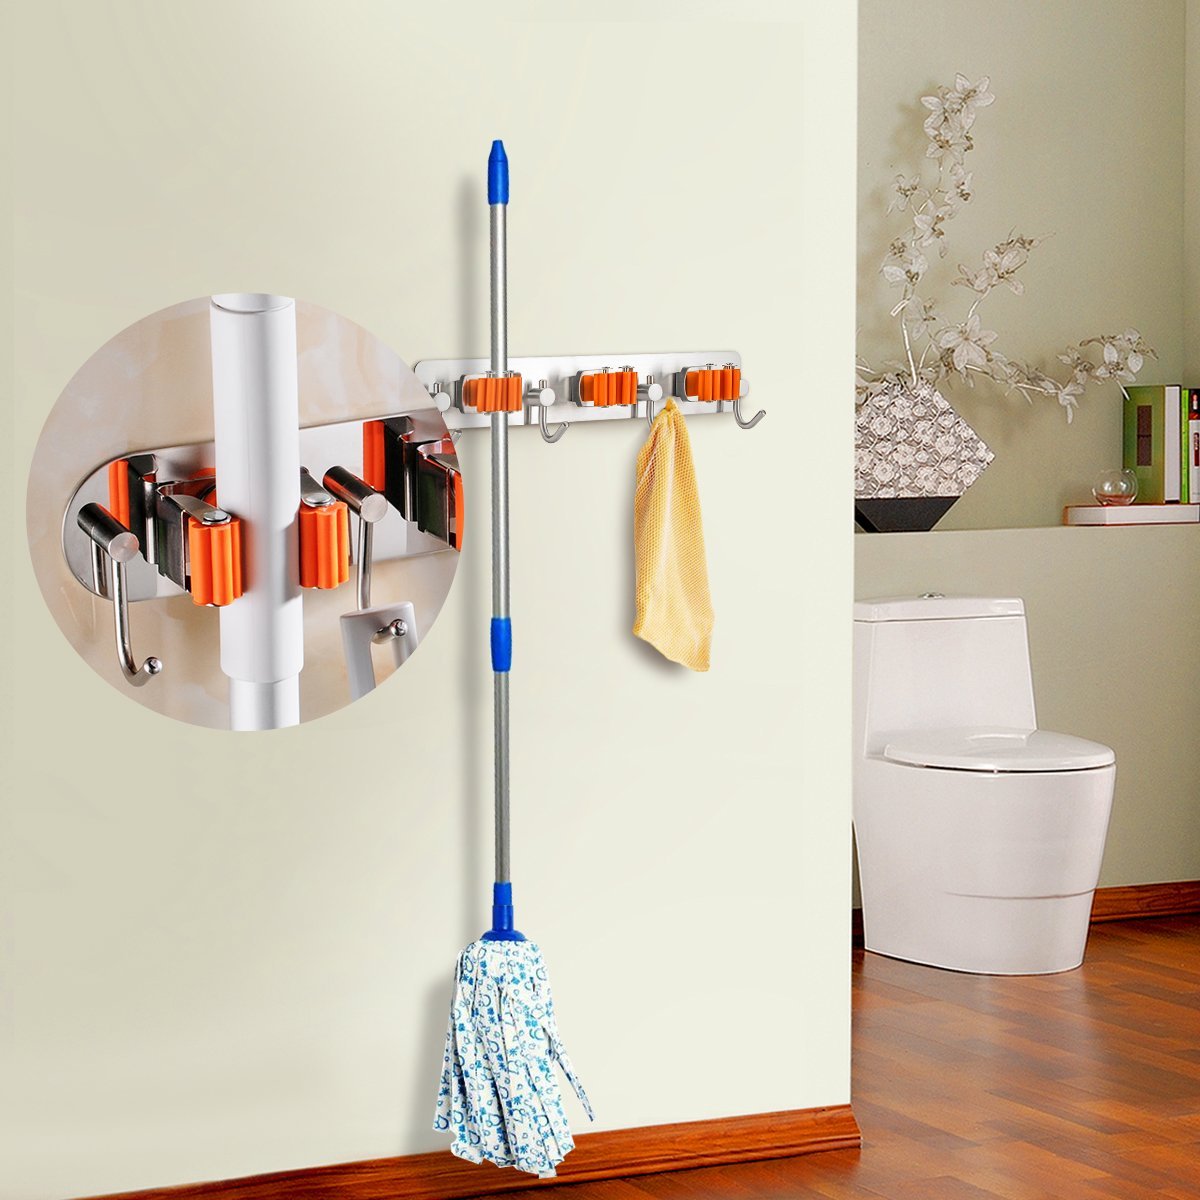 Bosszi Broom Holder Mop Holder Gardening Tools Organizer, SUS 304 Stainless Steel Brushed & Non-Slip Silicone Self-Adhesive Mounted Storage Racks with 3 Positions & 4 Hooks Holds Up to 7 Tools Firmly